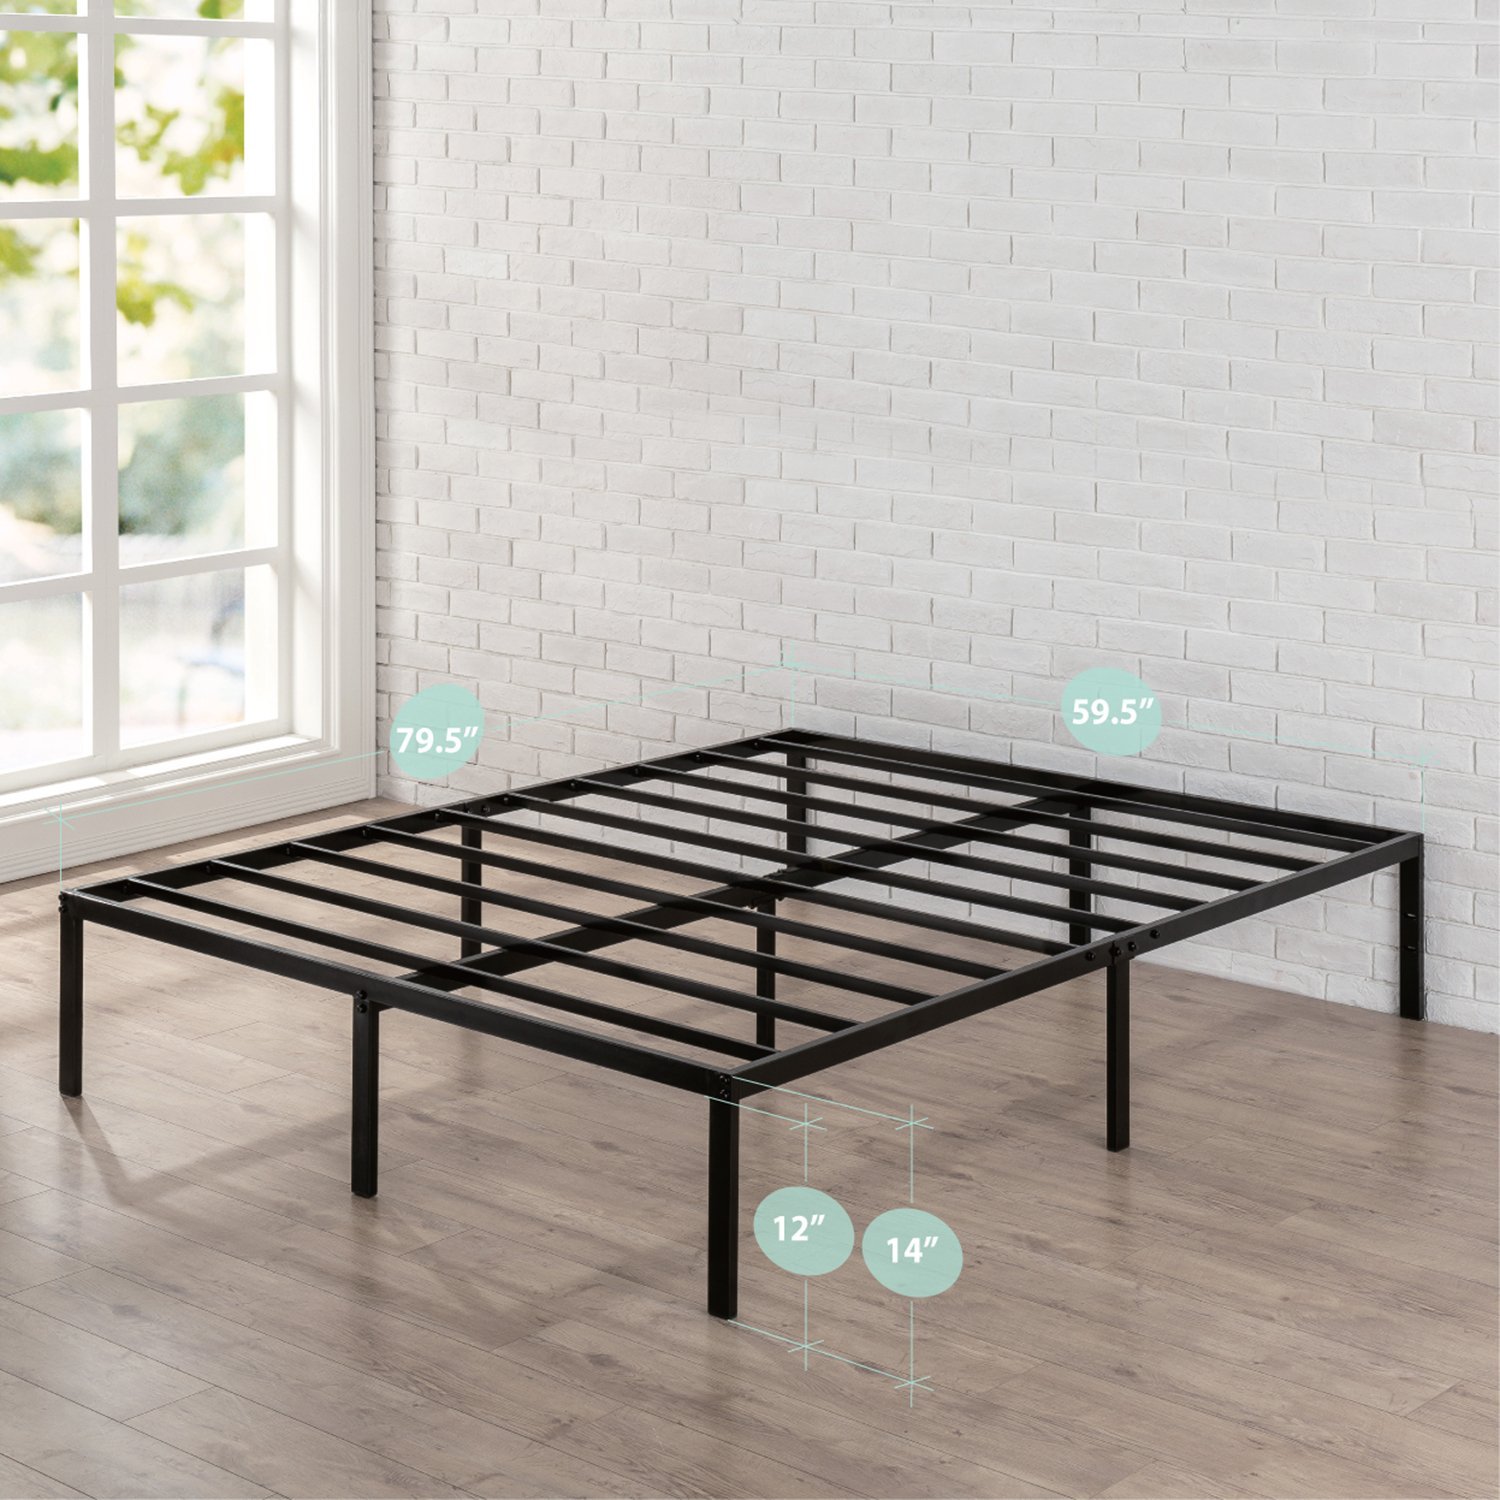 Zinus 14 Inch Classic Metal Platform Bed Frame with Steel Slat Support